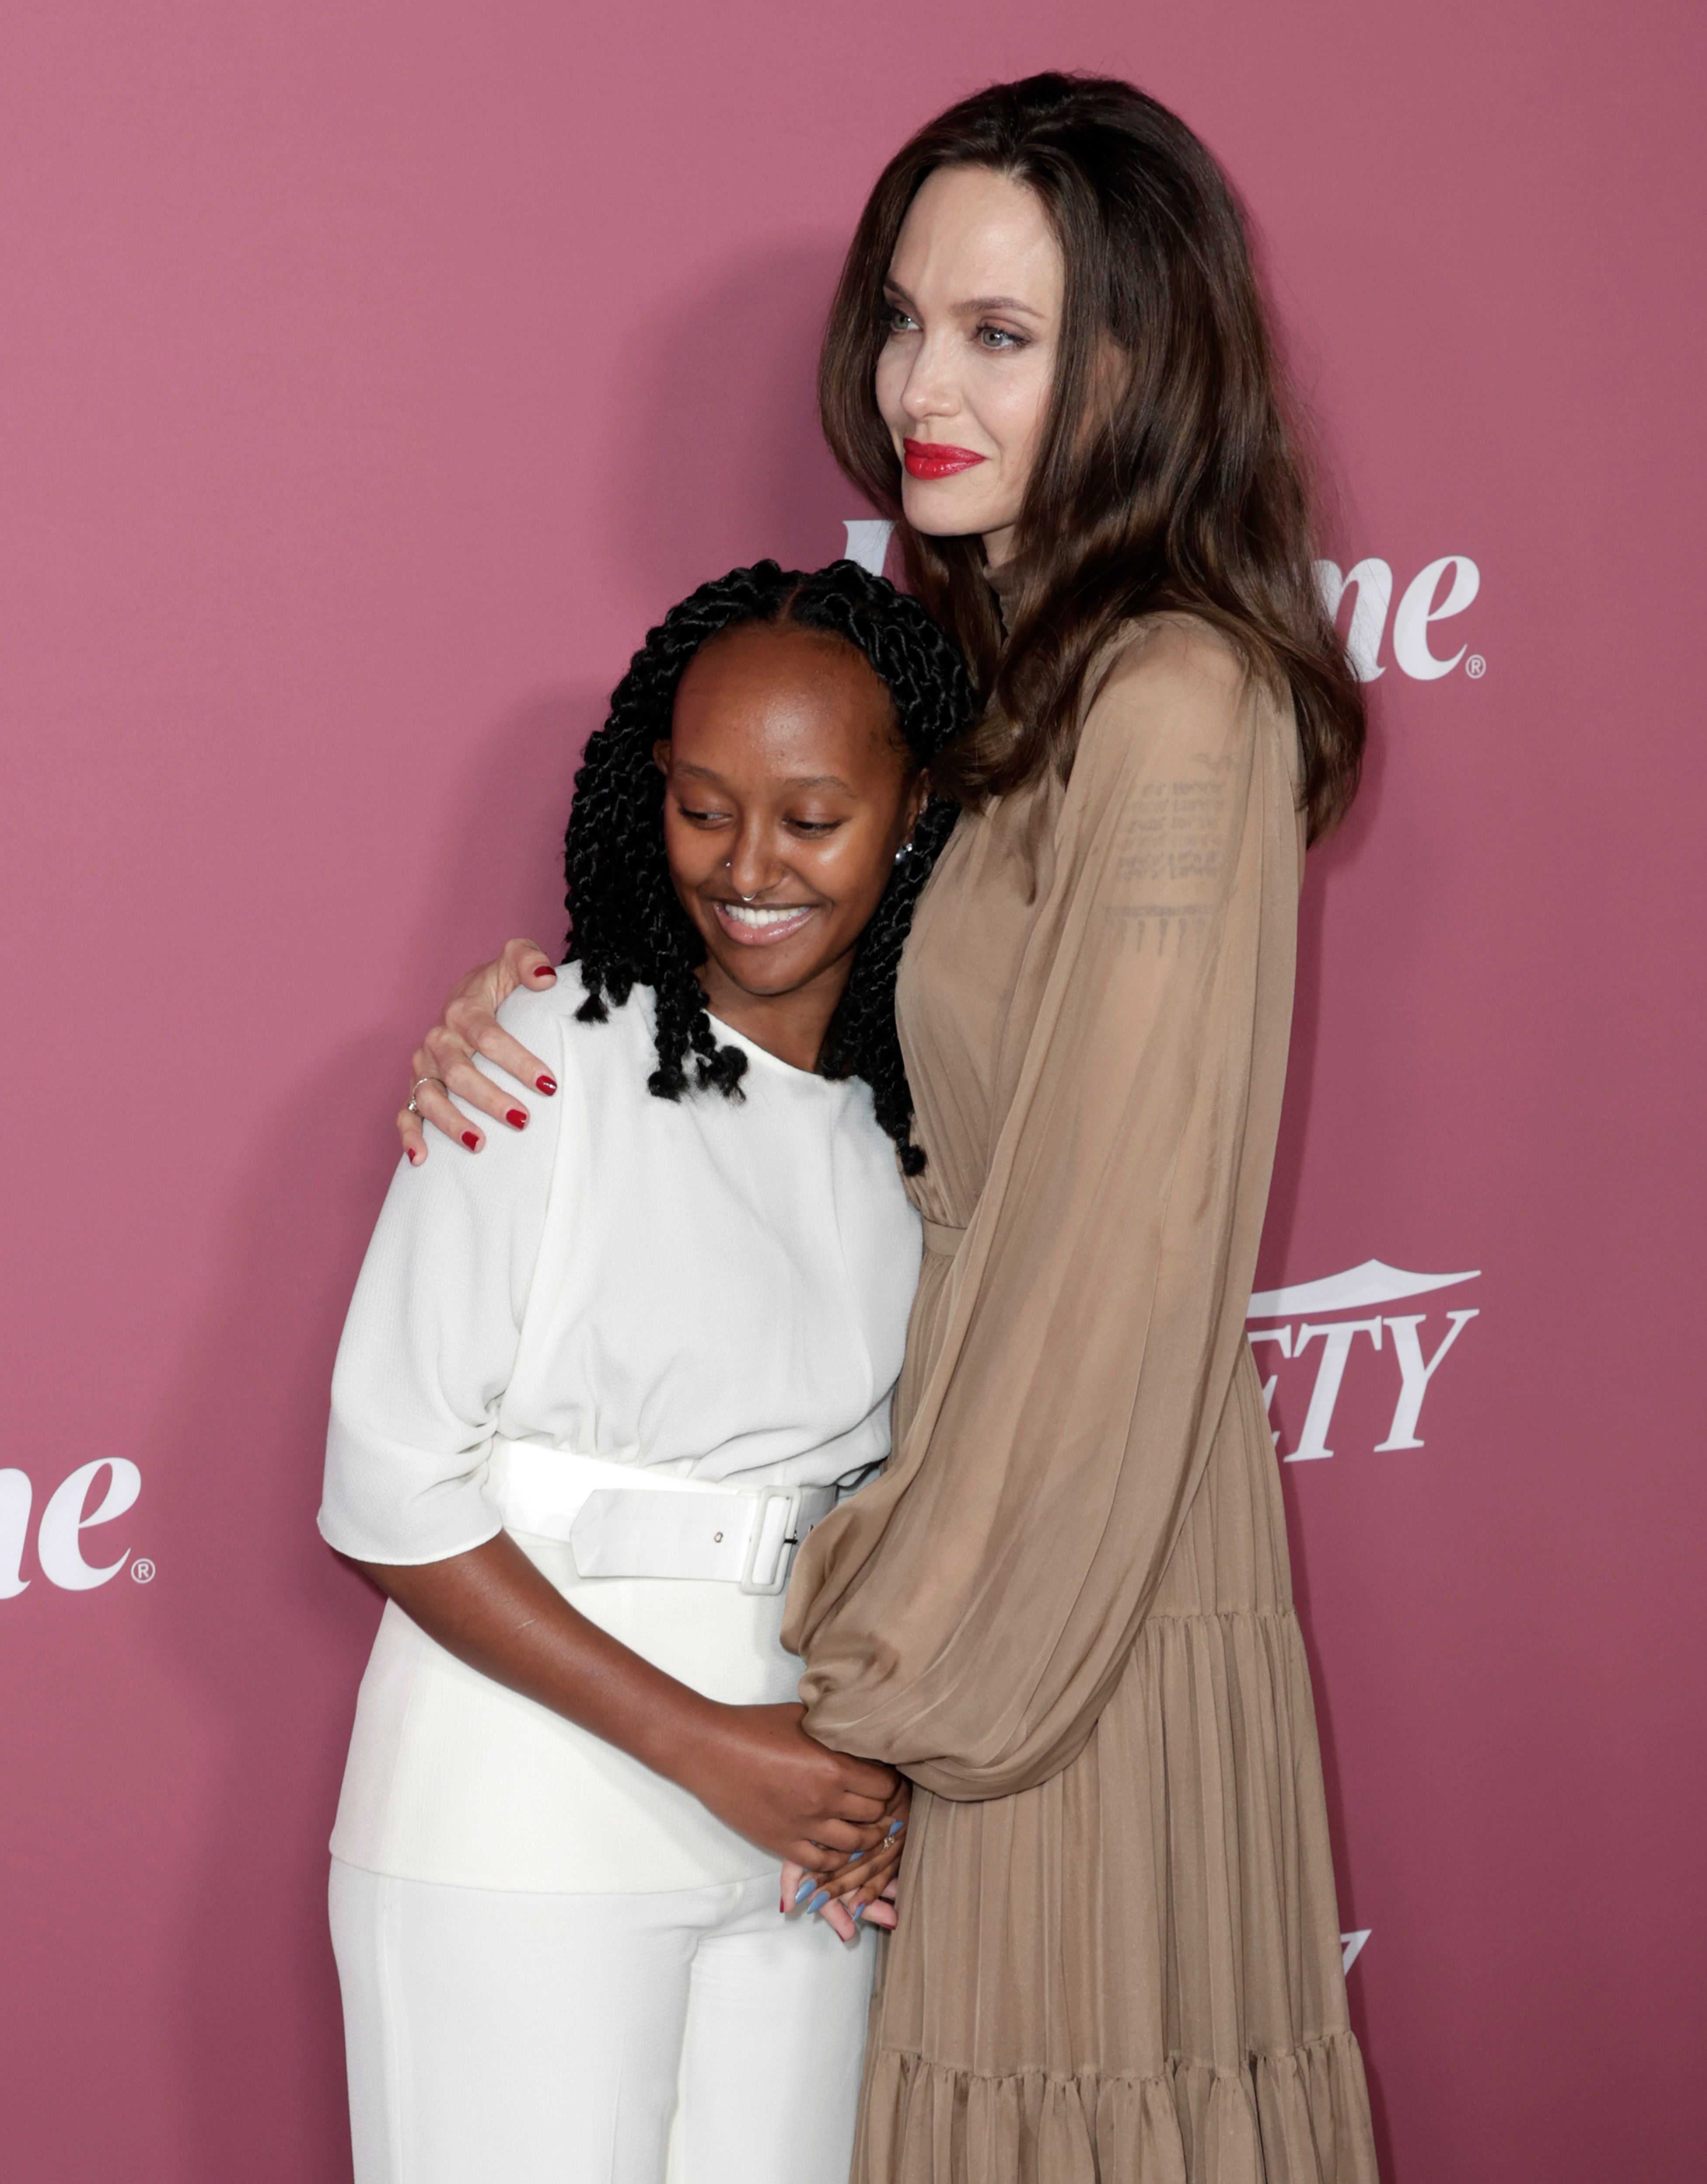 Zahara Jolie-Pitt and Angelina Jolie attend Variety's Power of Women in Beverly Hills, California, on September 30, 2021. | Source: Getty Images